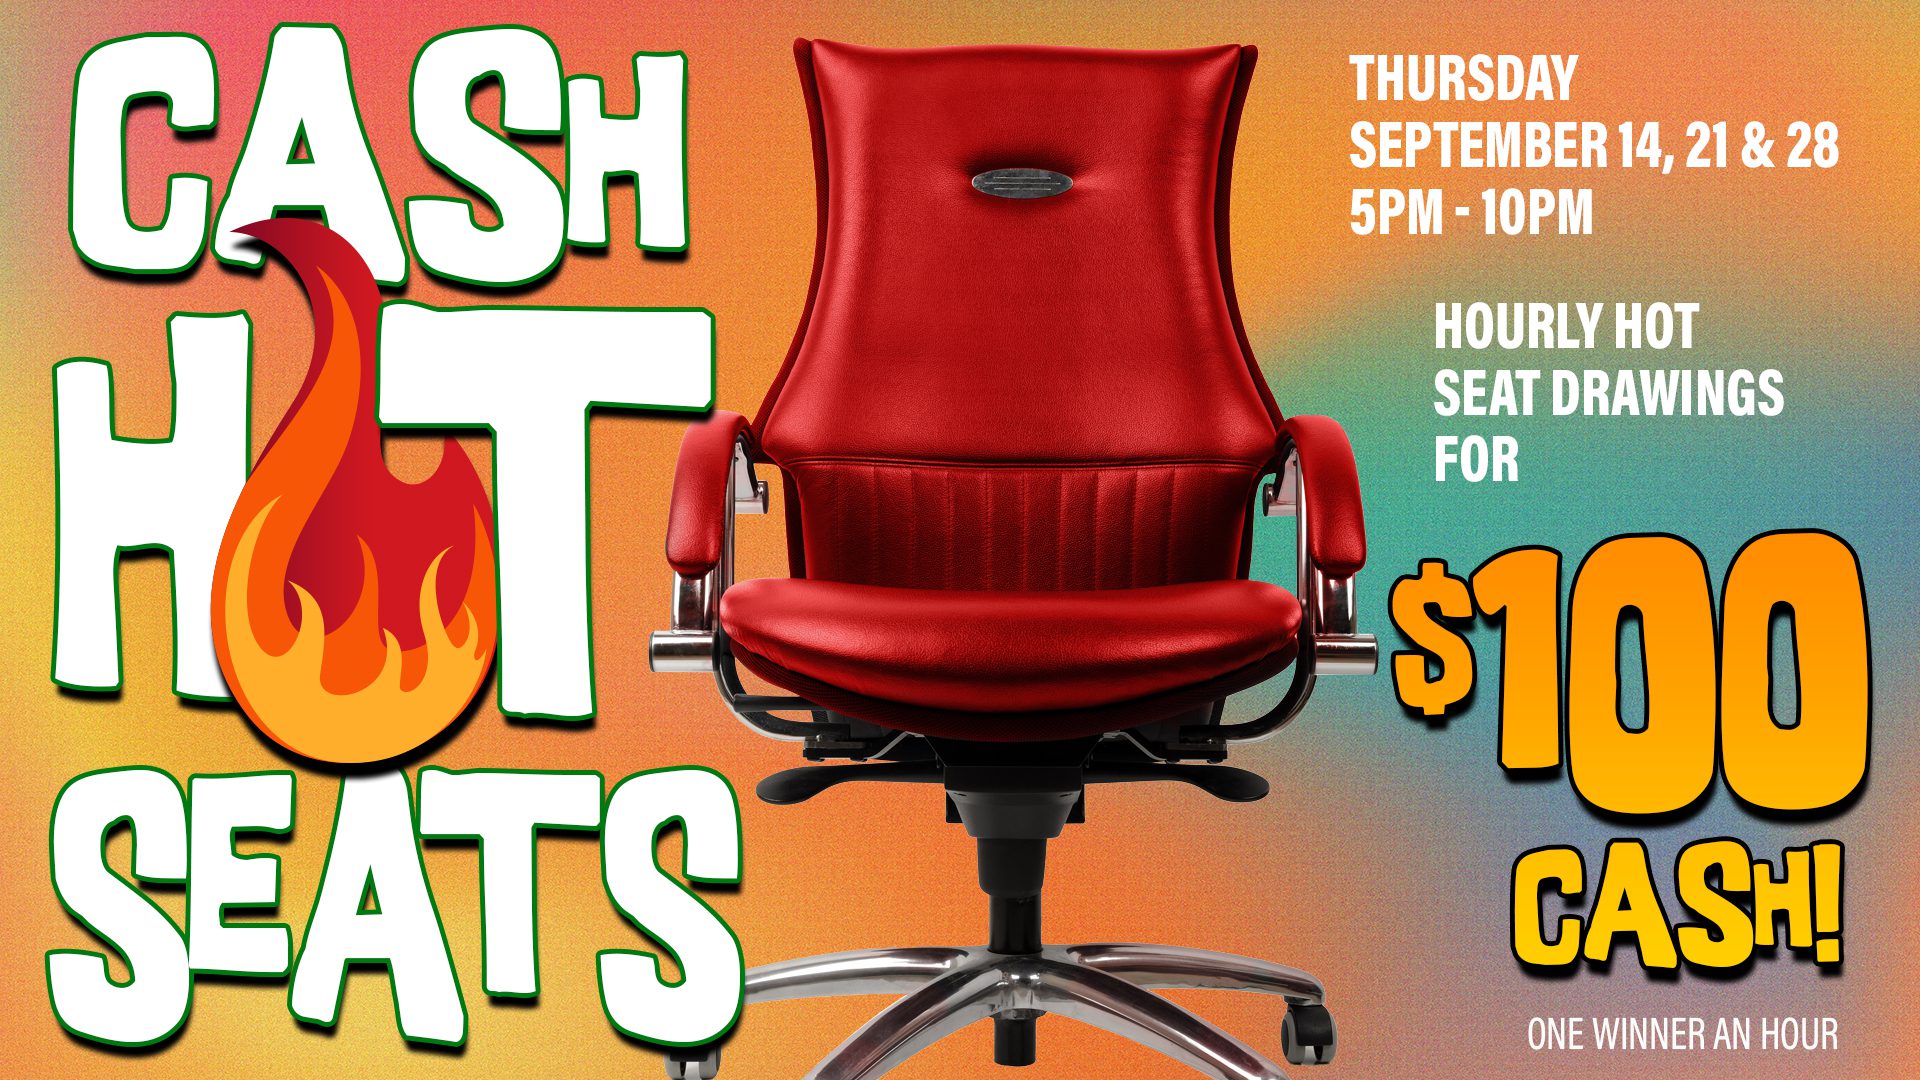 A red chair with flames on it and the words " rush seat seats ".